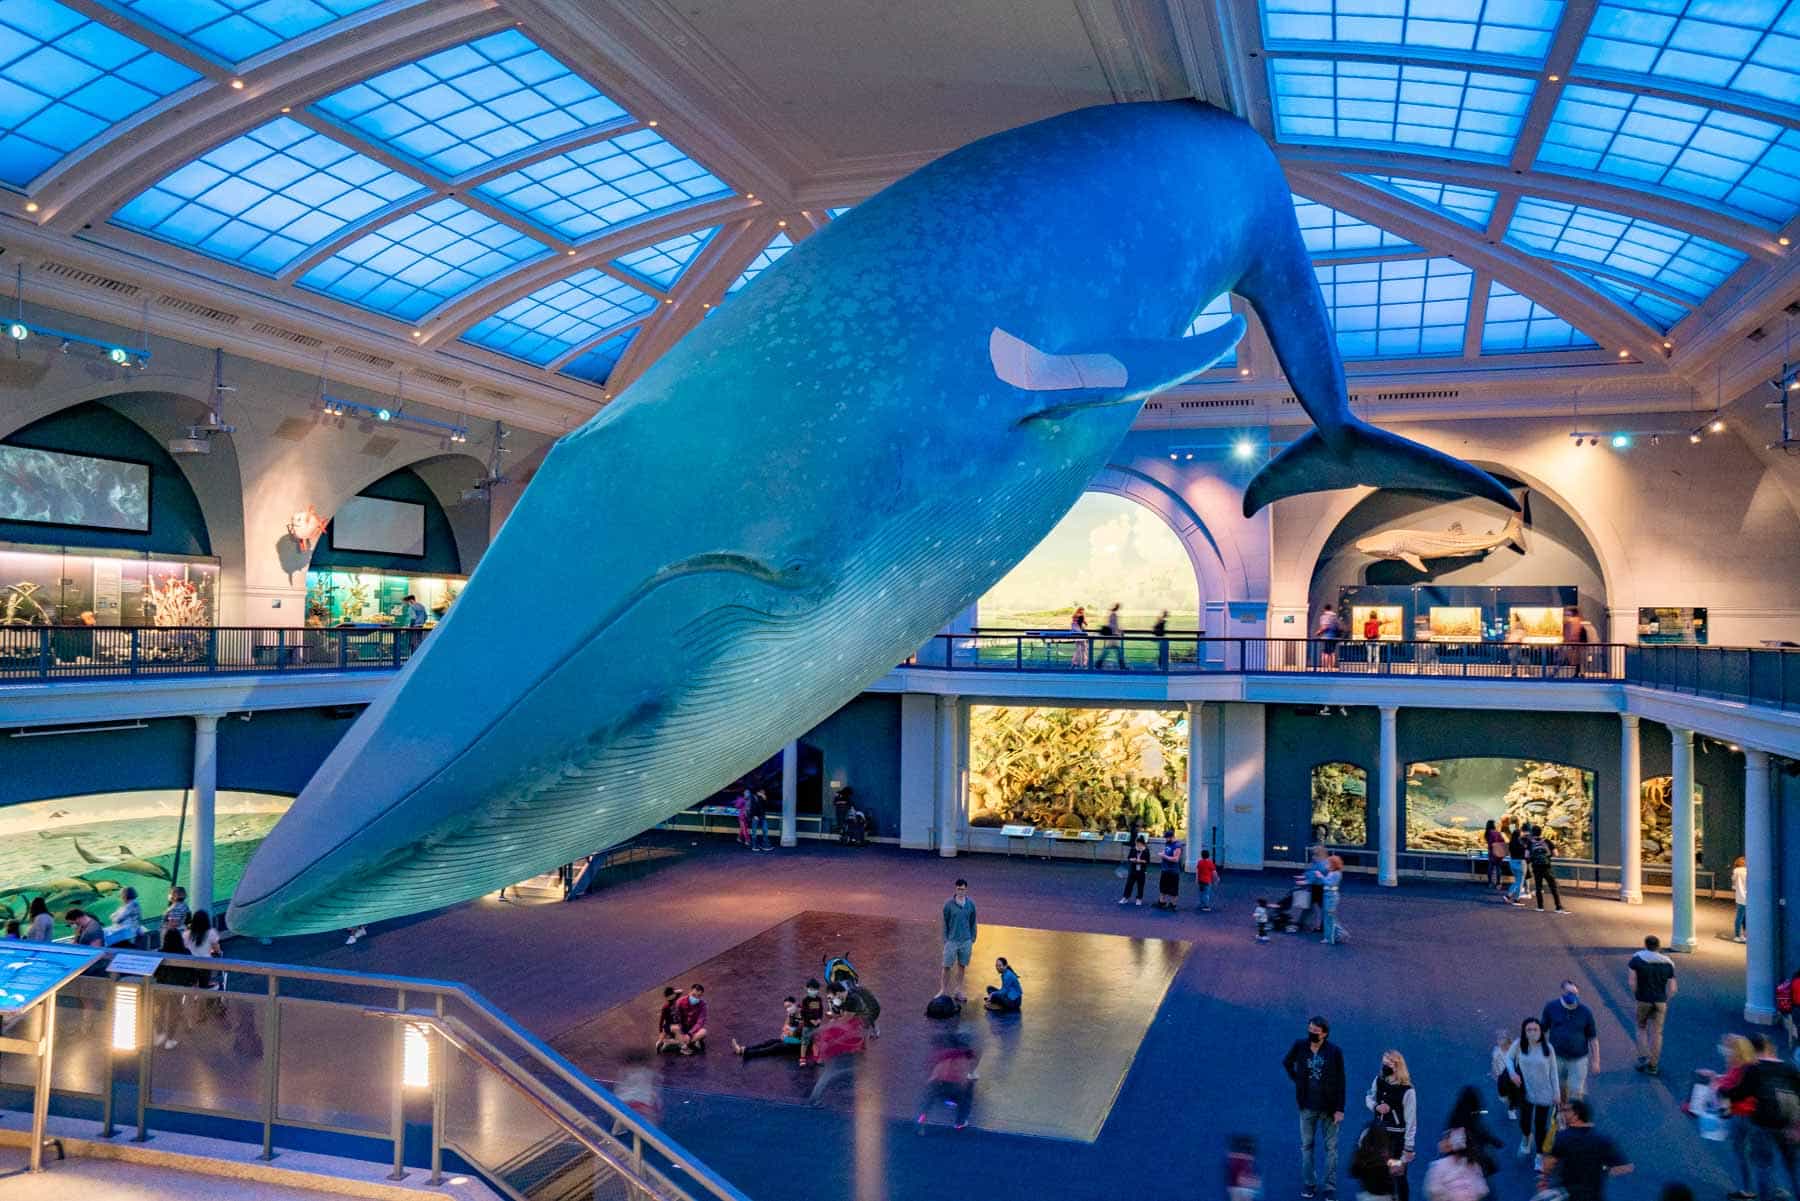 Things to see at AMNH, Blue Whale